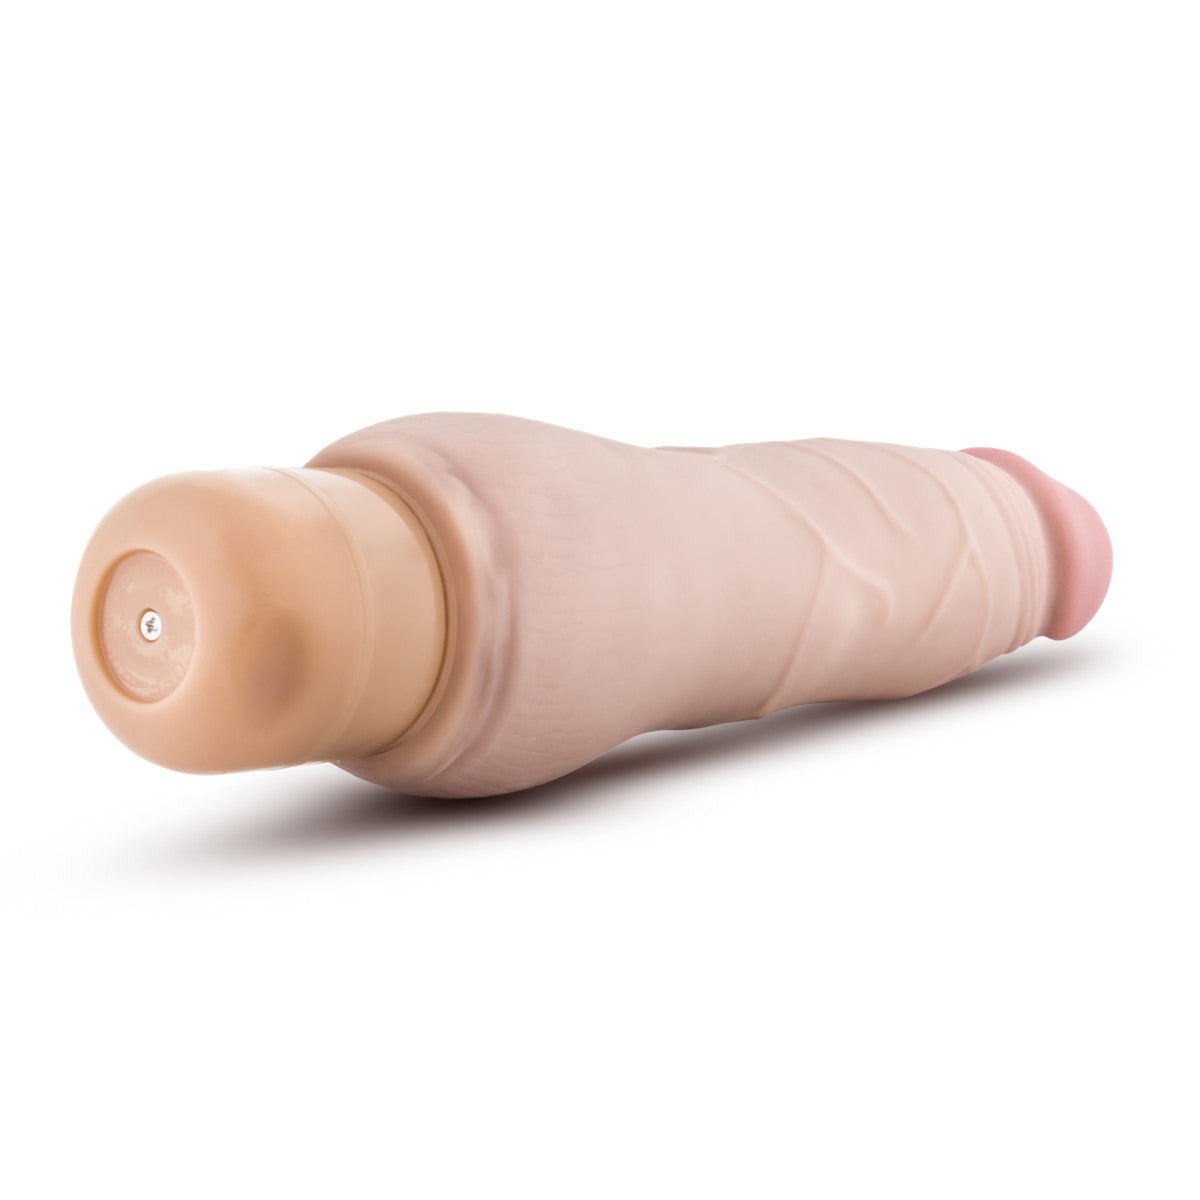 Vanilla skin tone realistic vibrating dildo. Defined pink head and subtle veins along the shaft. Twist dial on bottom to control intensity. Additional images show alternate angles.